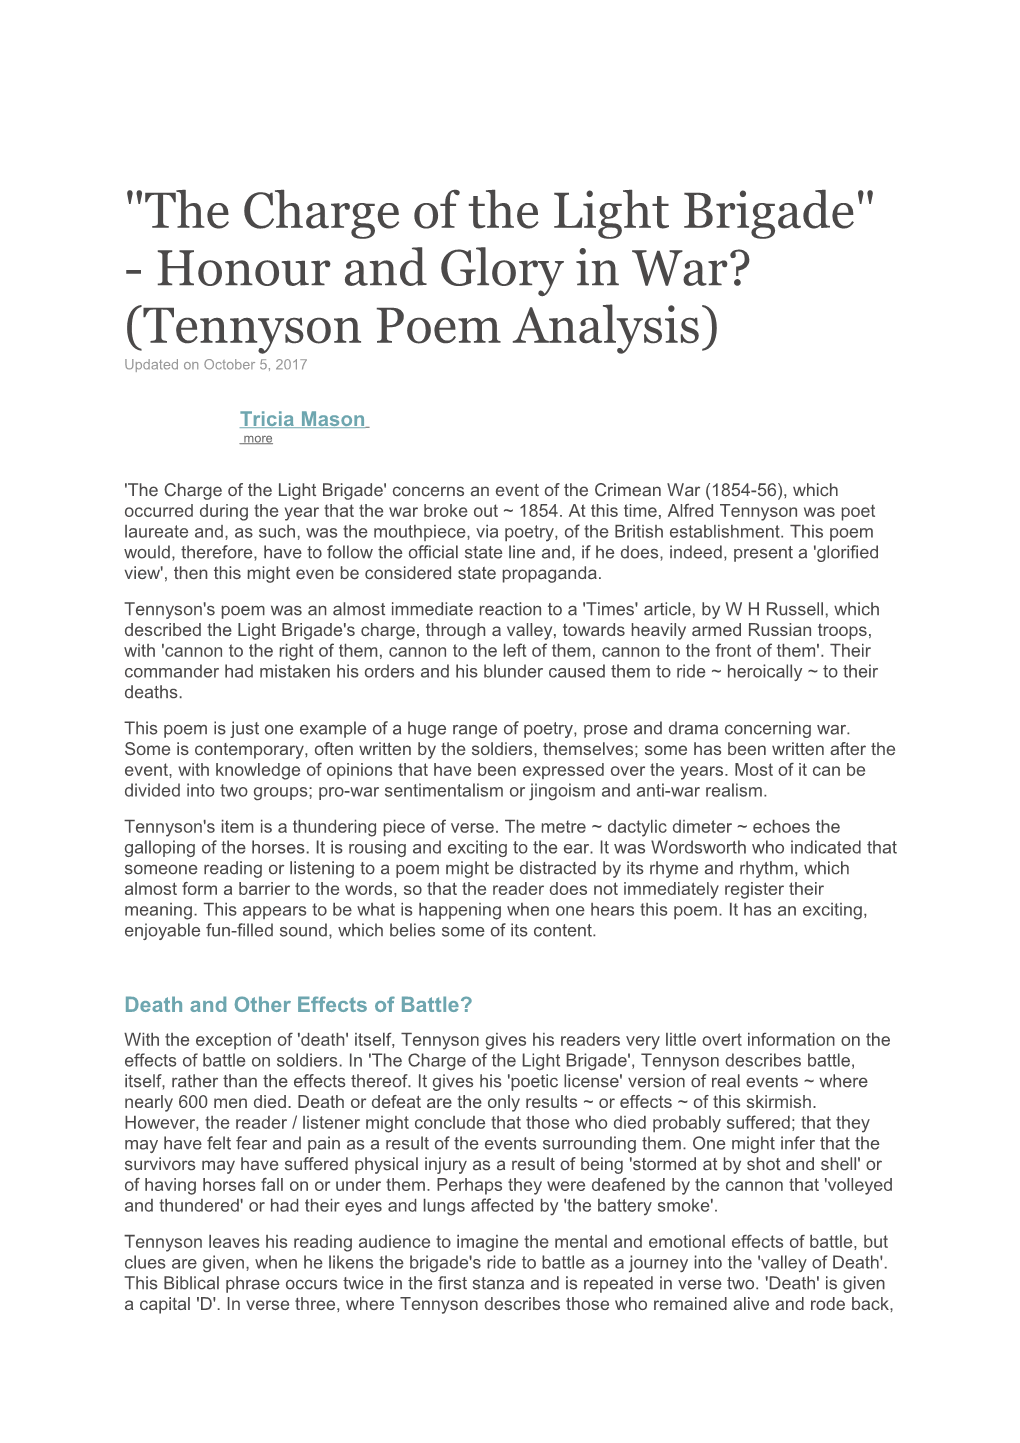 The Charge of the Light Brigade - Honour and Glory in War? (Tennyson Poem Analysis)